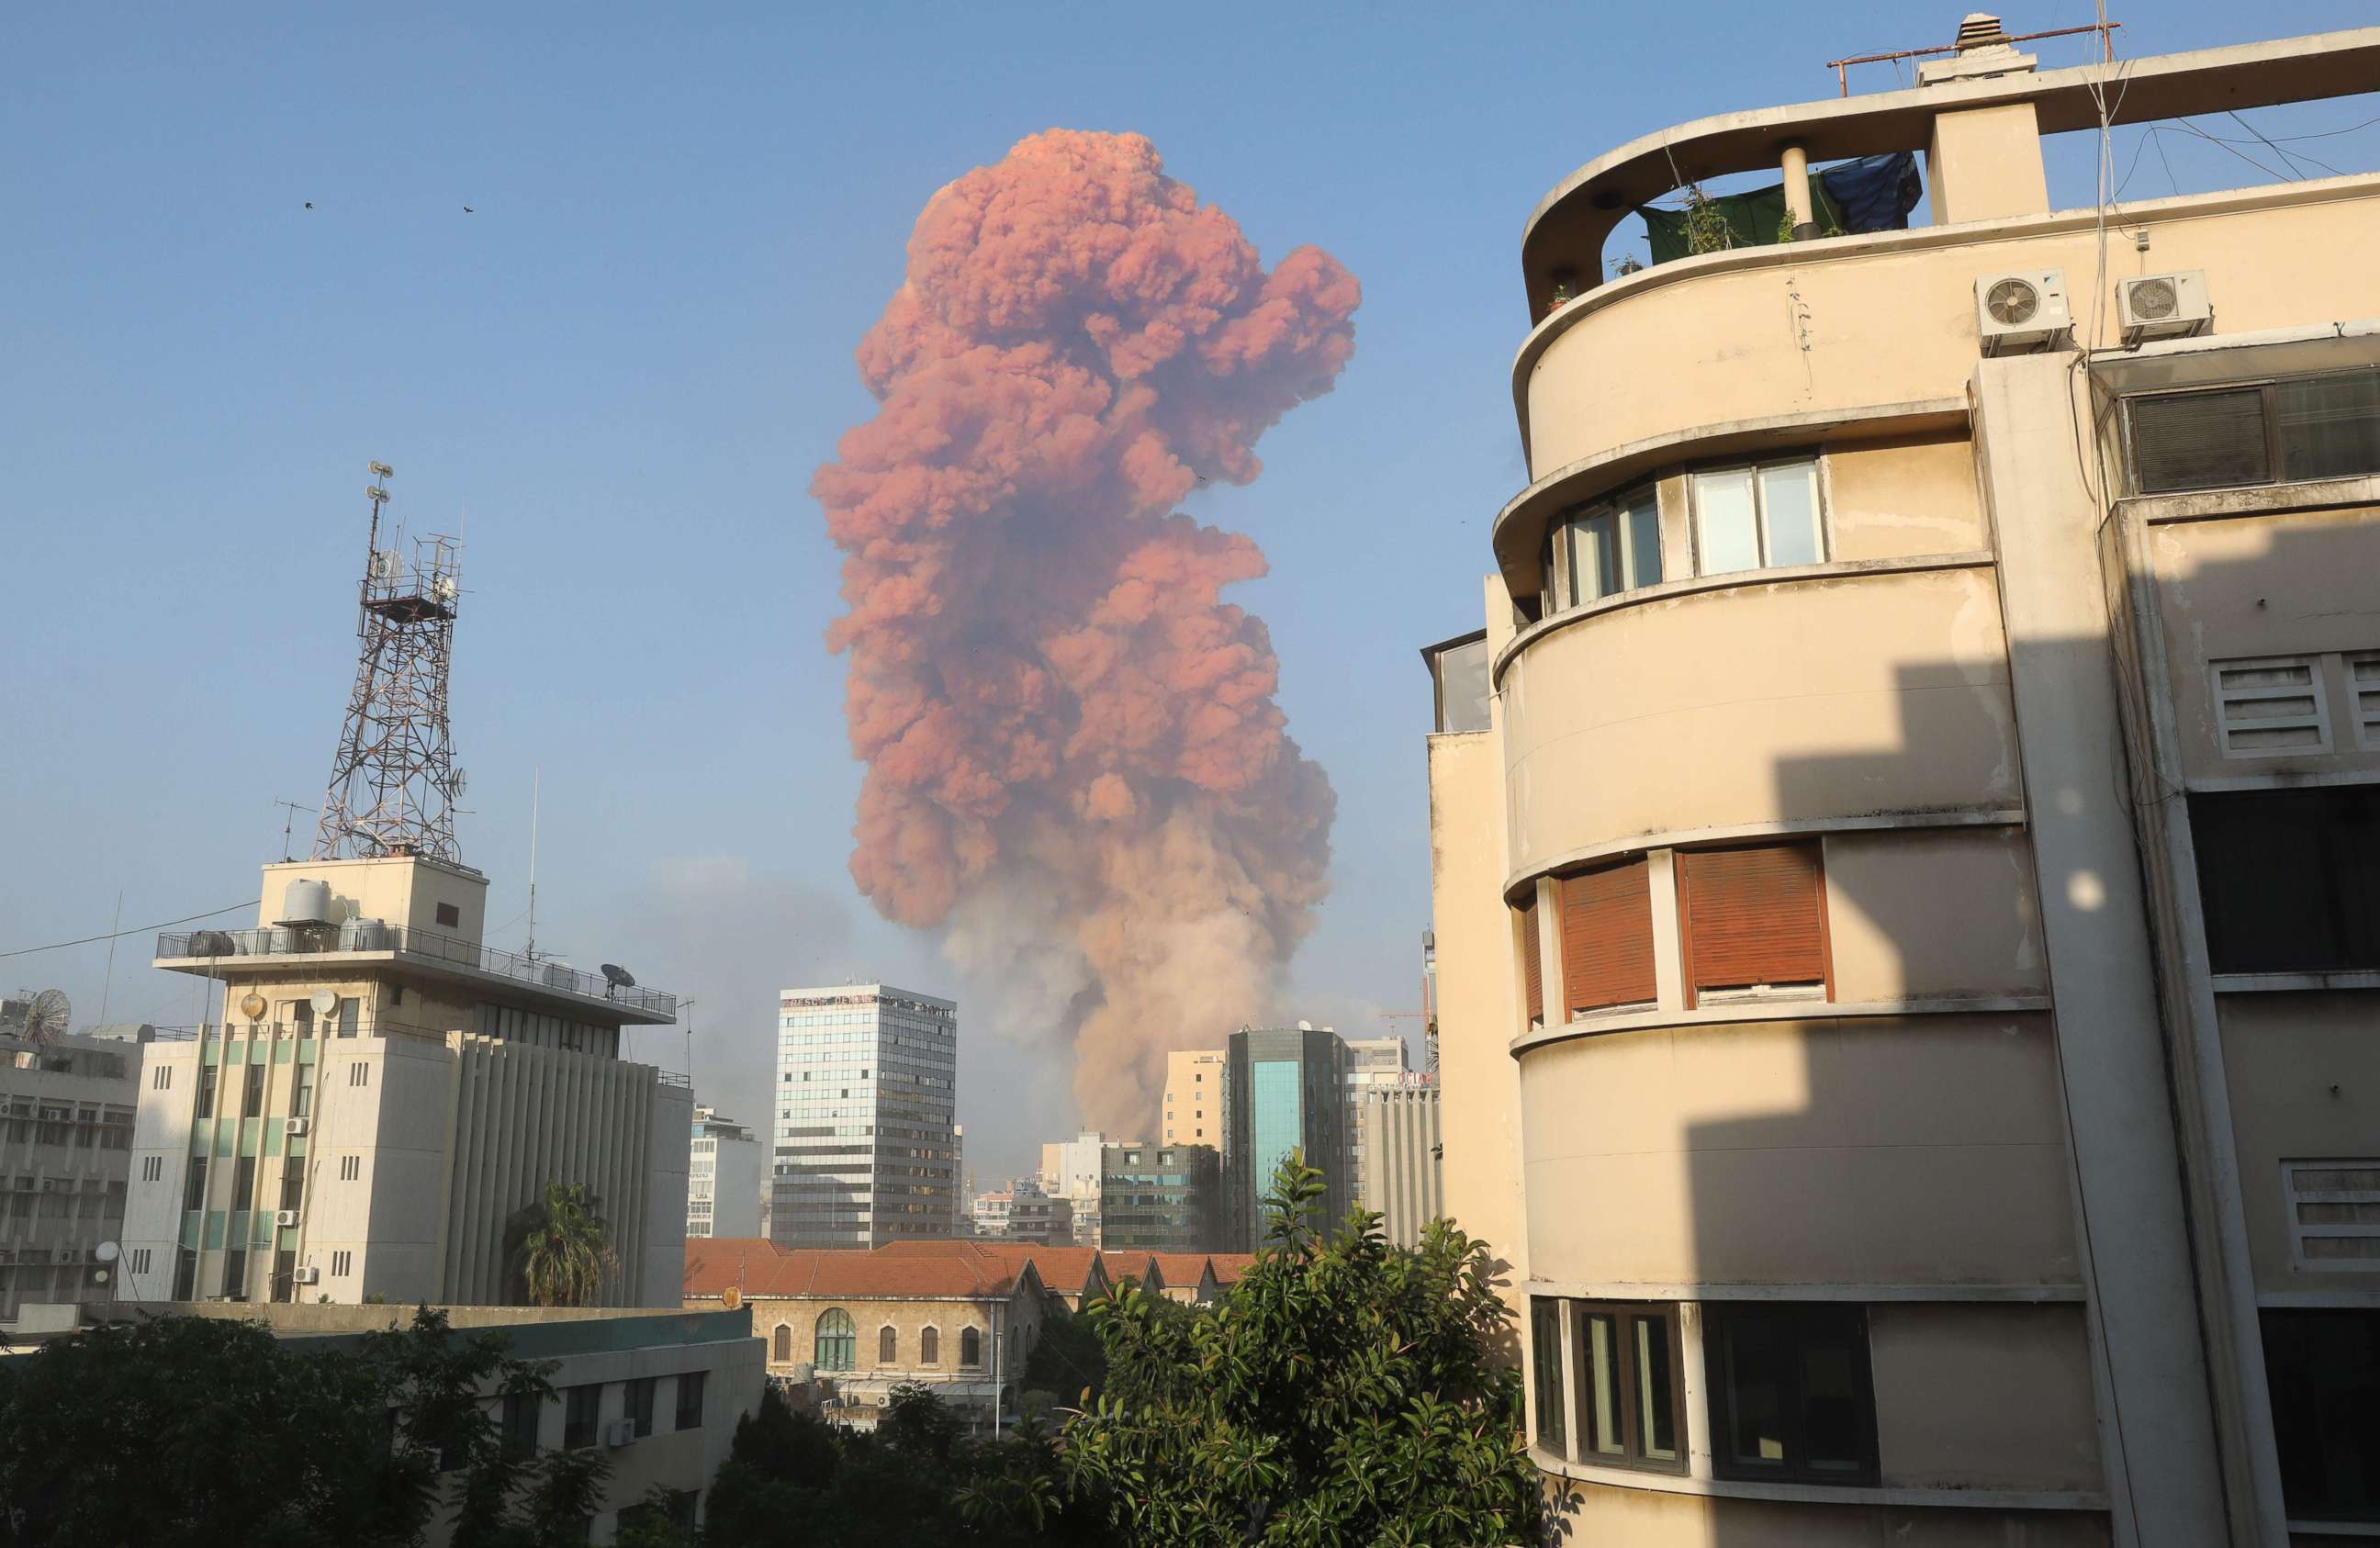 PHOTO: A picture shows the scene of an explosion in Beirut, Aug. 4, 2020.